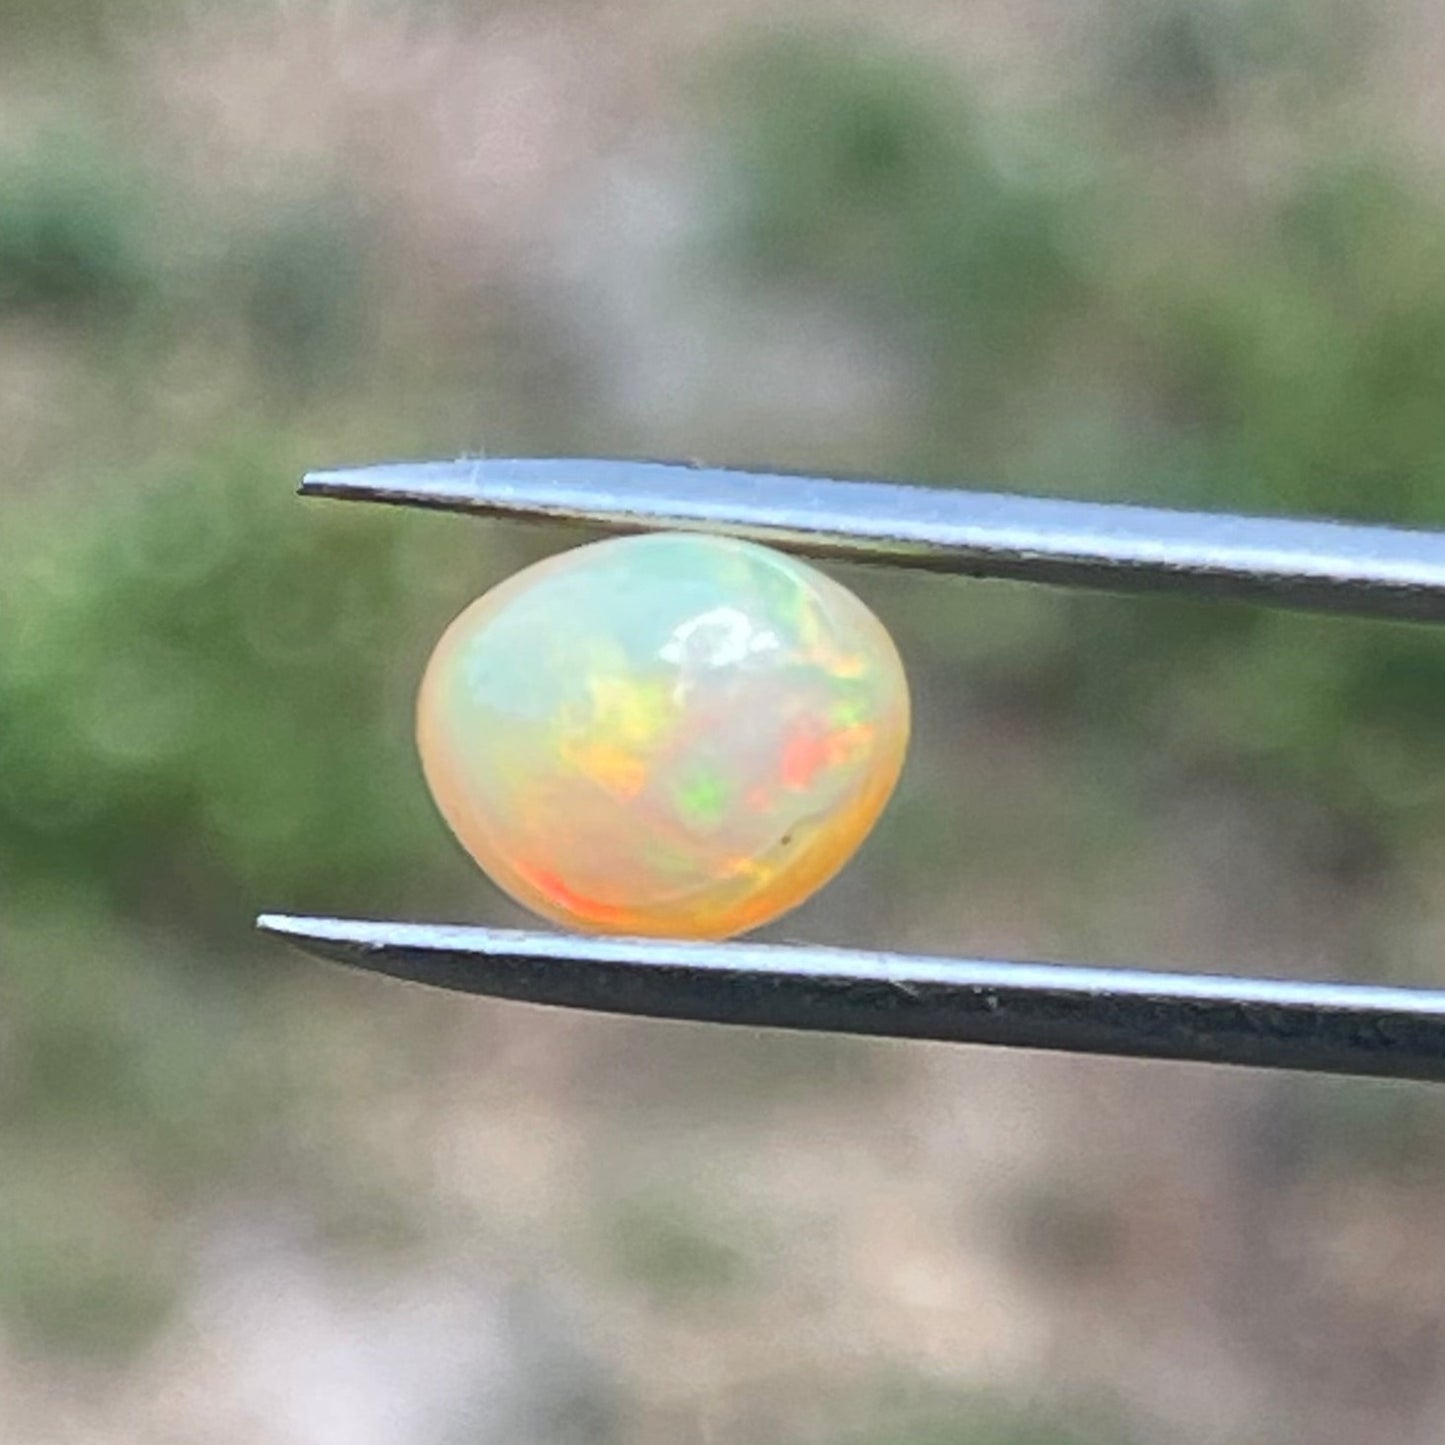 3.14 Carat Natural Ethiopian Opal Cabochon Cut Loose Gemstone with Vibrant Fire